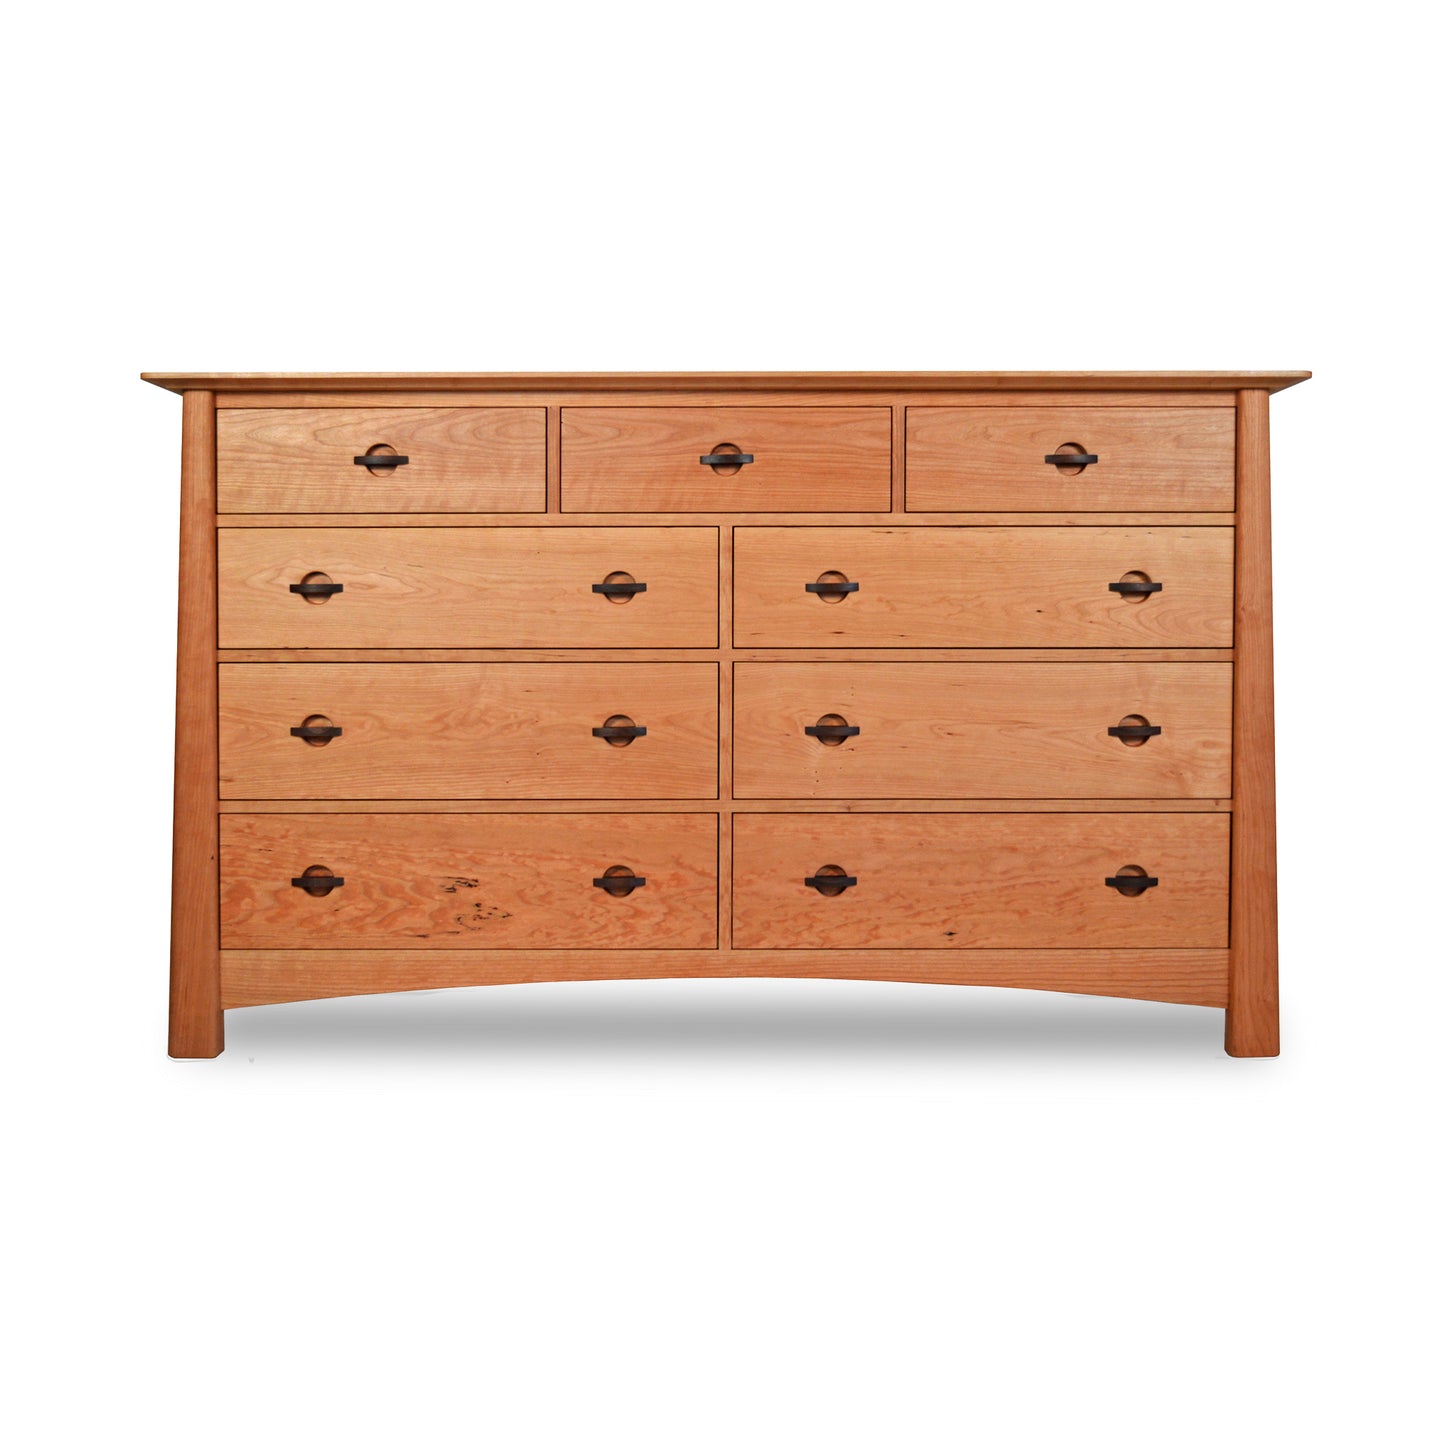 A handmade Cherry Moon 9-Drawer Dresser by Maple Corner Woodworks, featuring a symmetrical layout with three smaller drawers across the top and six larger drawers below, all with round handles, against a white background.